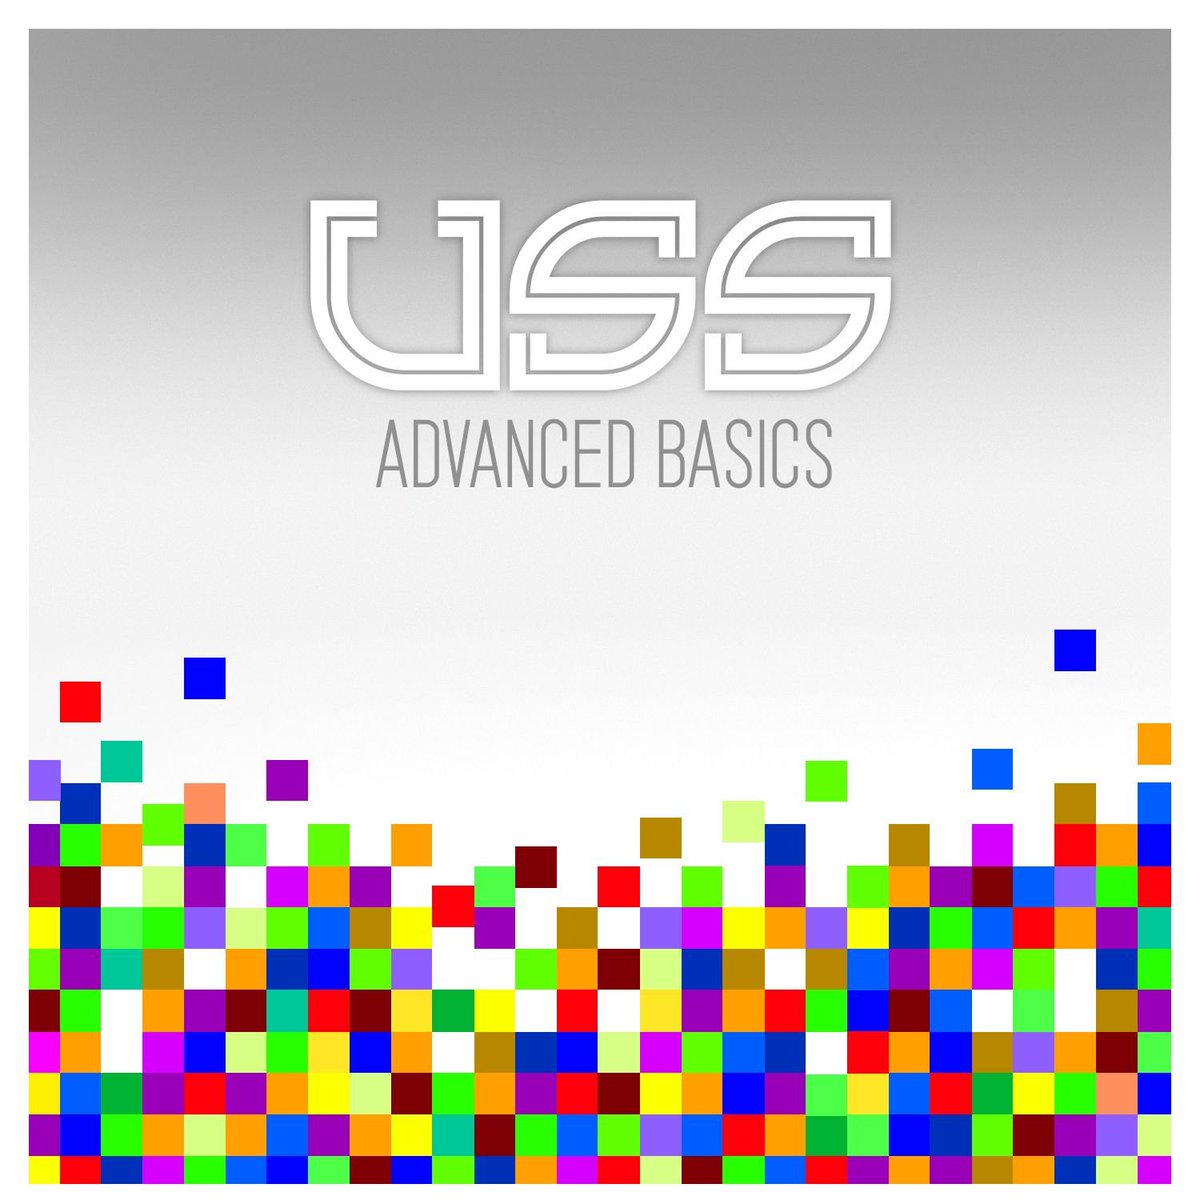 Happy 9th birthday to @USSMUSIC's 'Advanced Basics'! This album spawned singles This Is The Best, Yin Yang, Nepal and Shipwreck and was their first international release, contributing to it being their most successful project to date. @HUMANKEBAB @ussmusicfanpage @MattExit